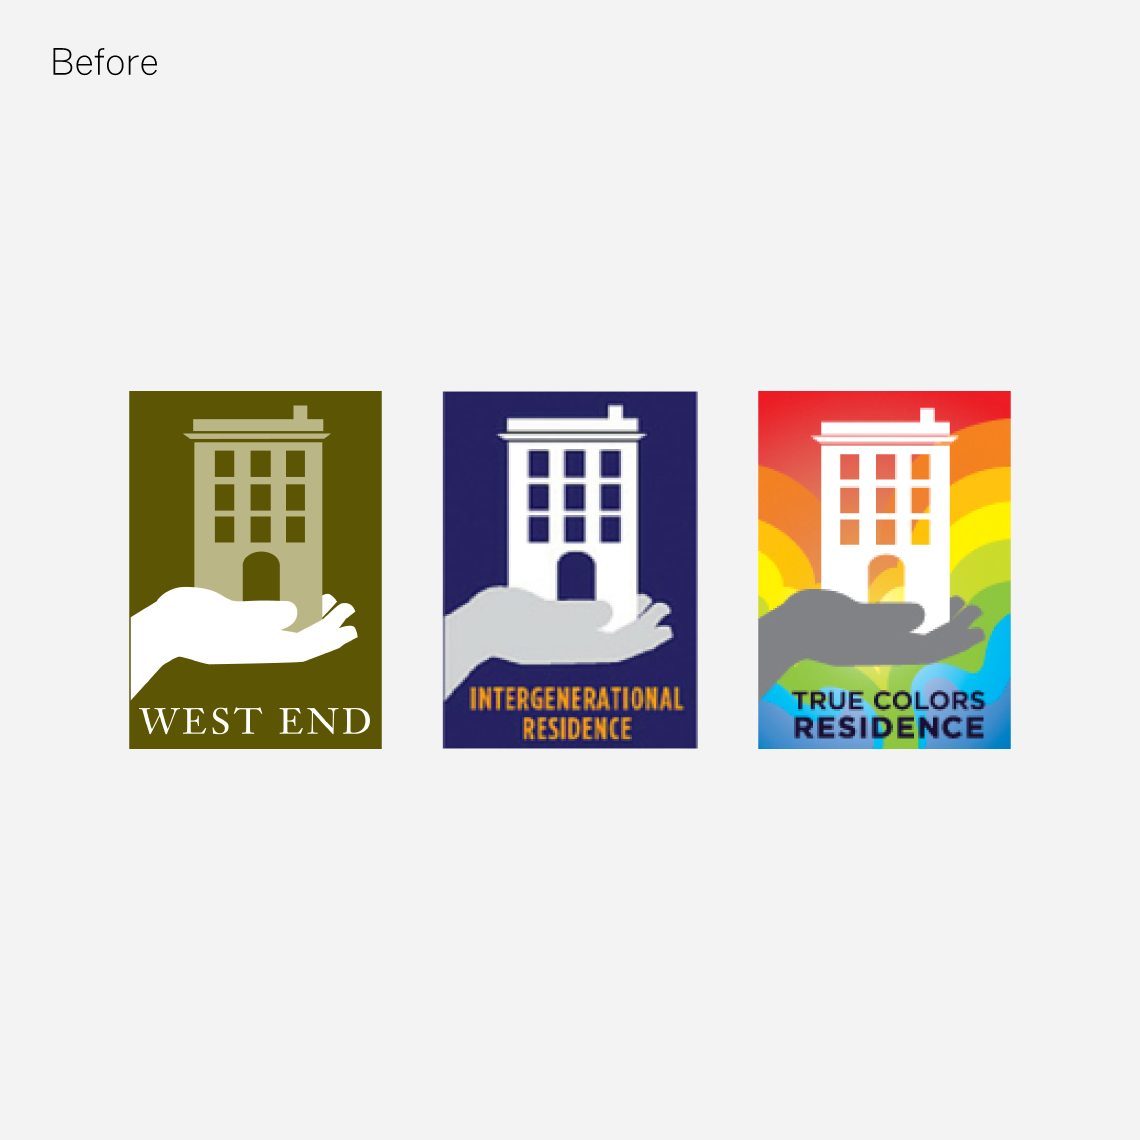 The old logos for West End Residences